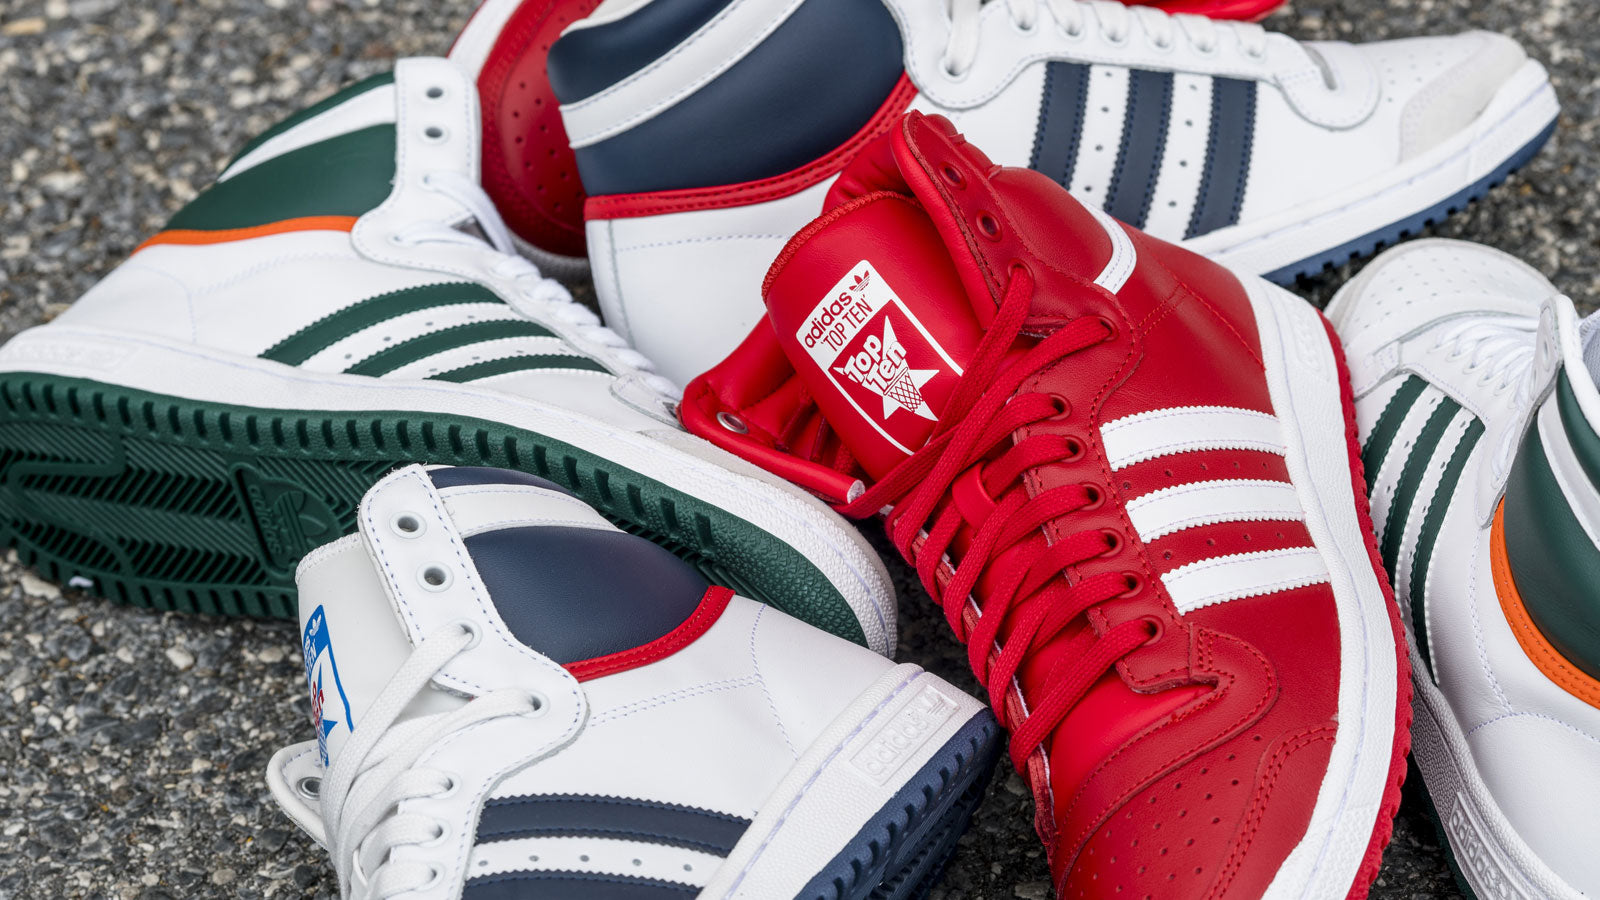 red and white adidas top ten